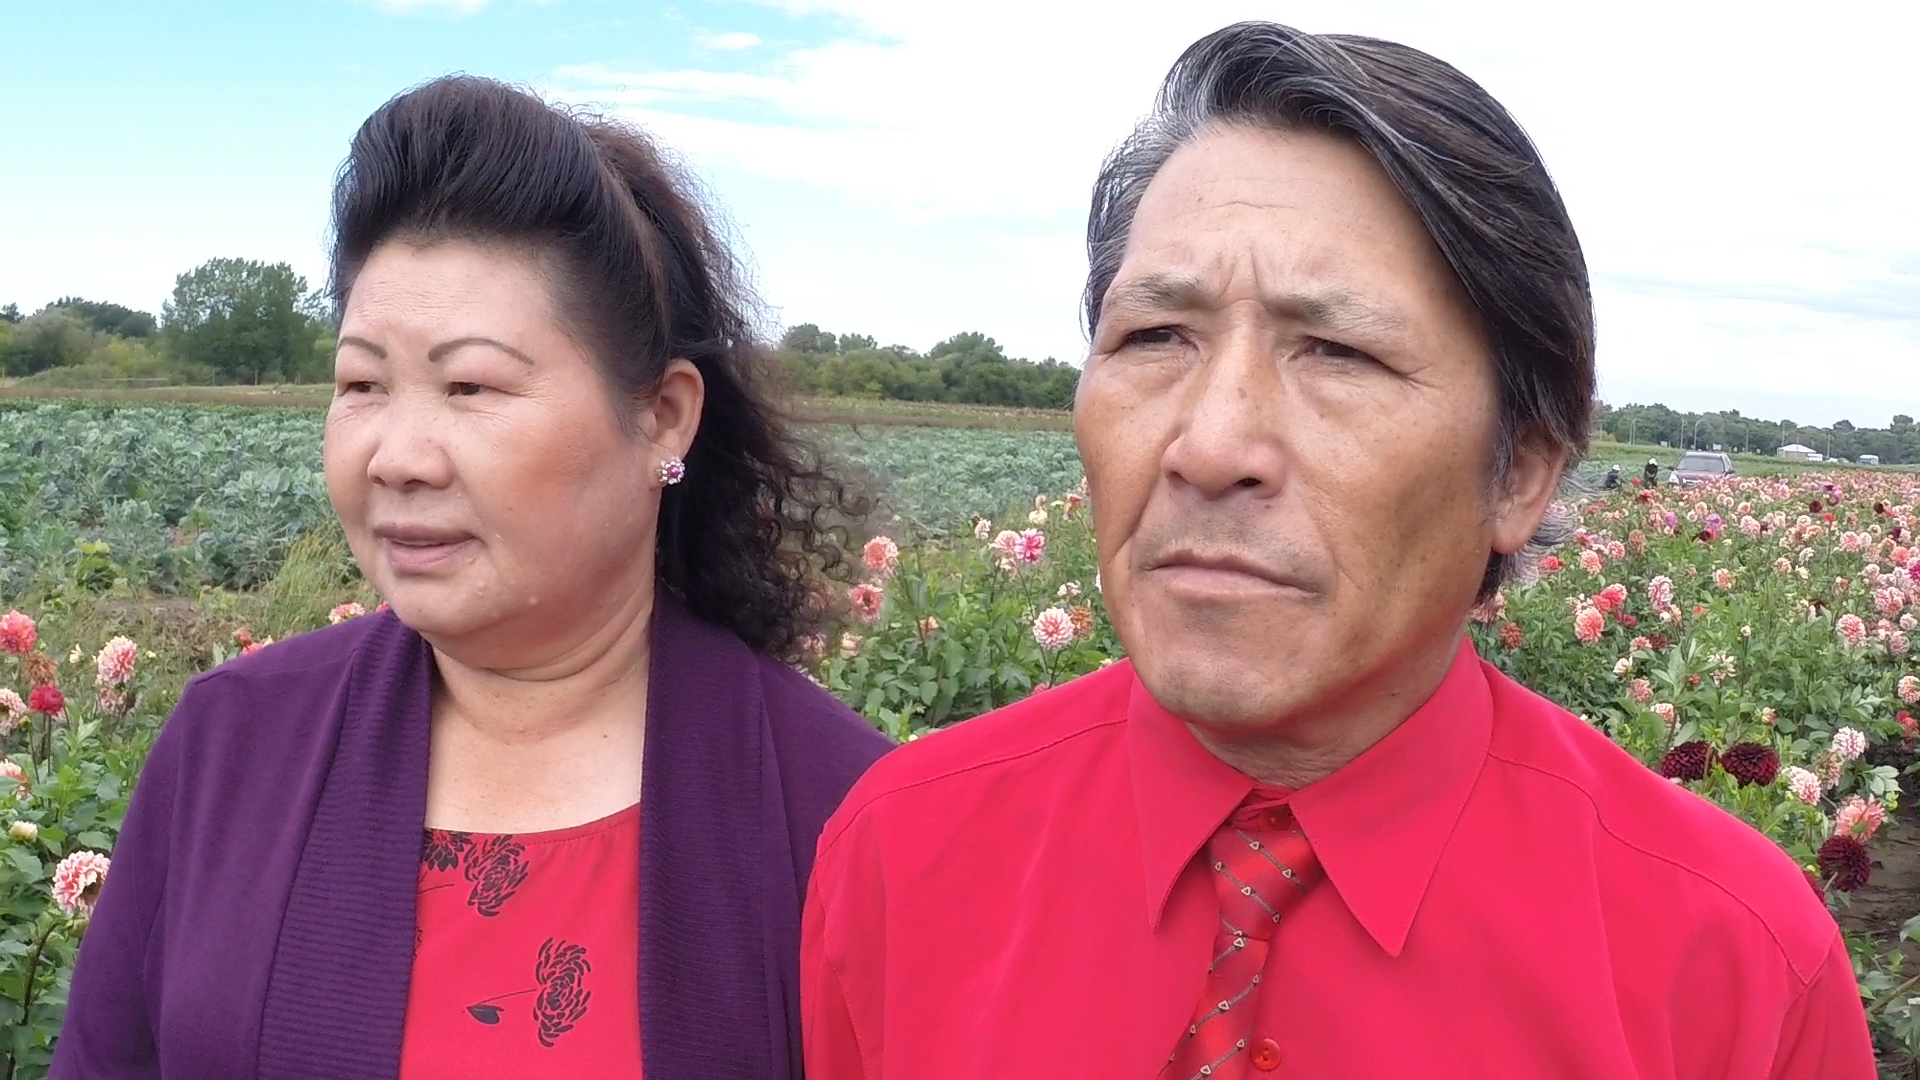 An Asian woman and Asian man, standing in a field of flowers.